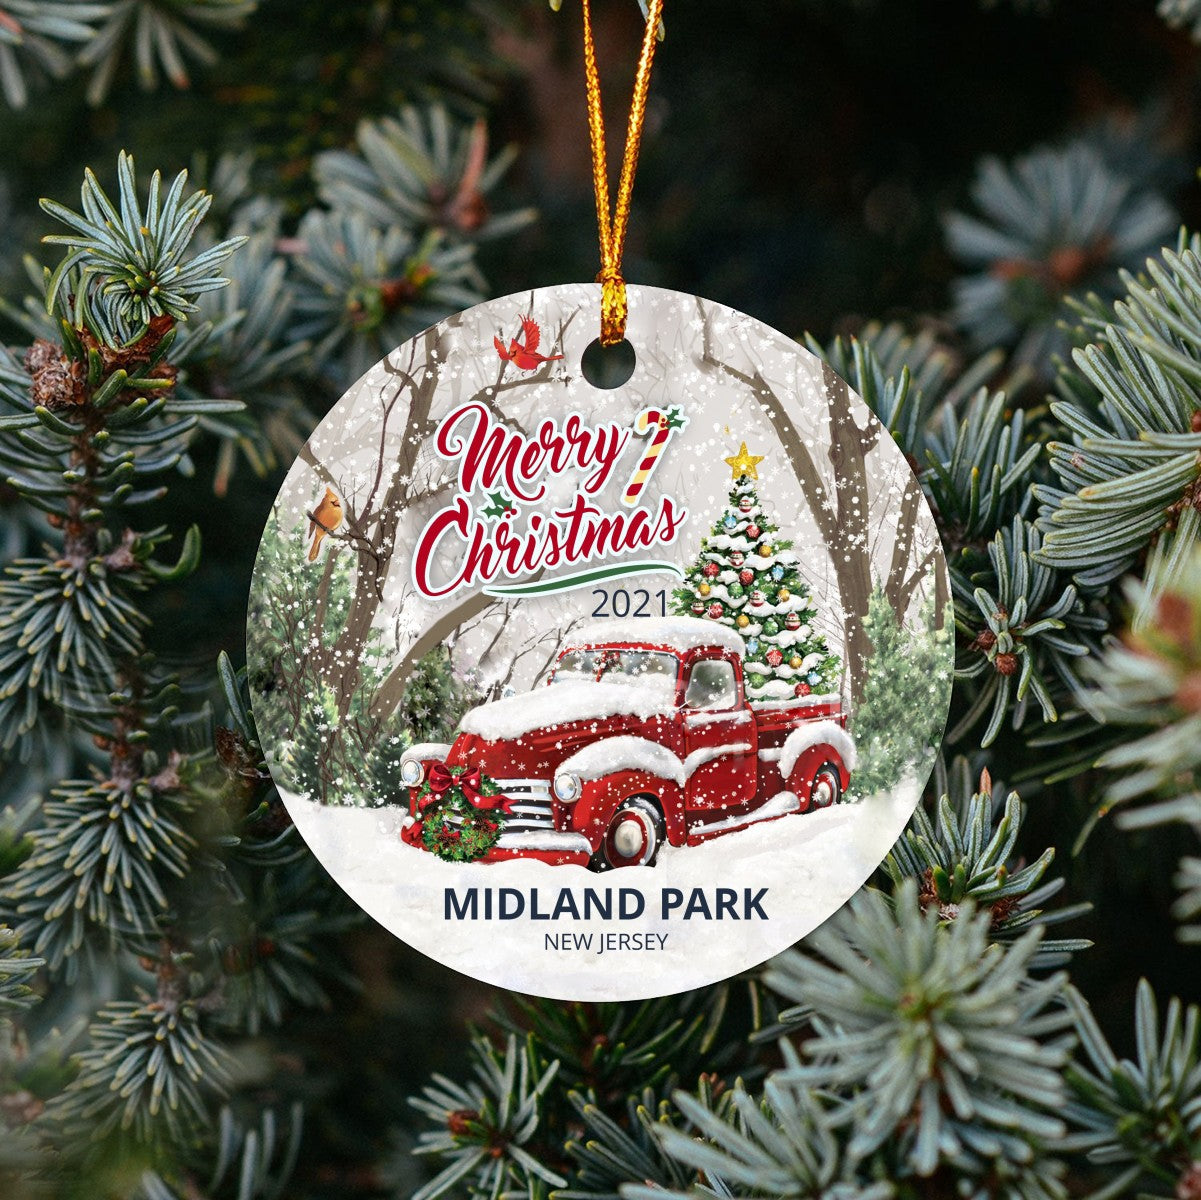 Christmas Tree Ornaments Midland Park - Ornament With Name City, State Midland Park New Jersey NJ Ornament - Red Truck Xmas Ornaments 3'' Plastic Gift For Family, Friend And Housewarming